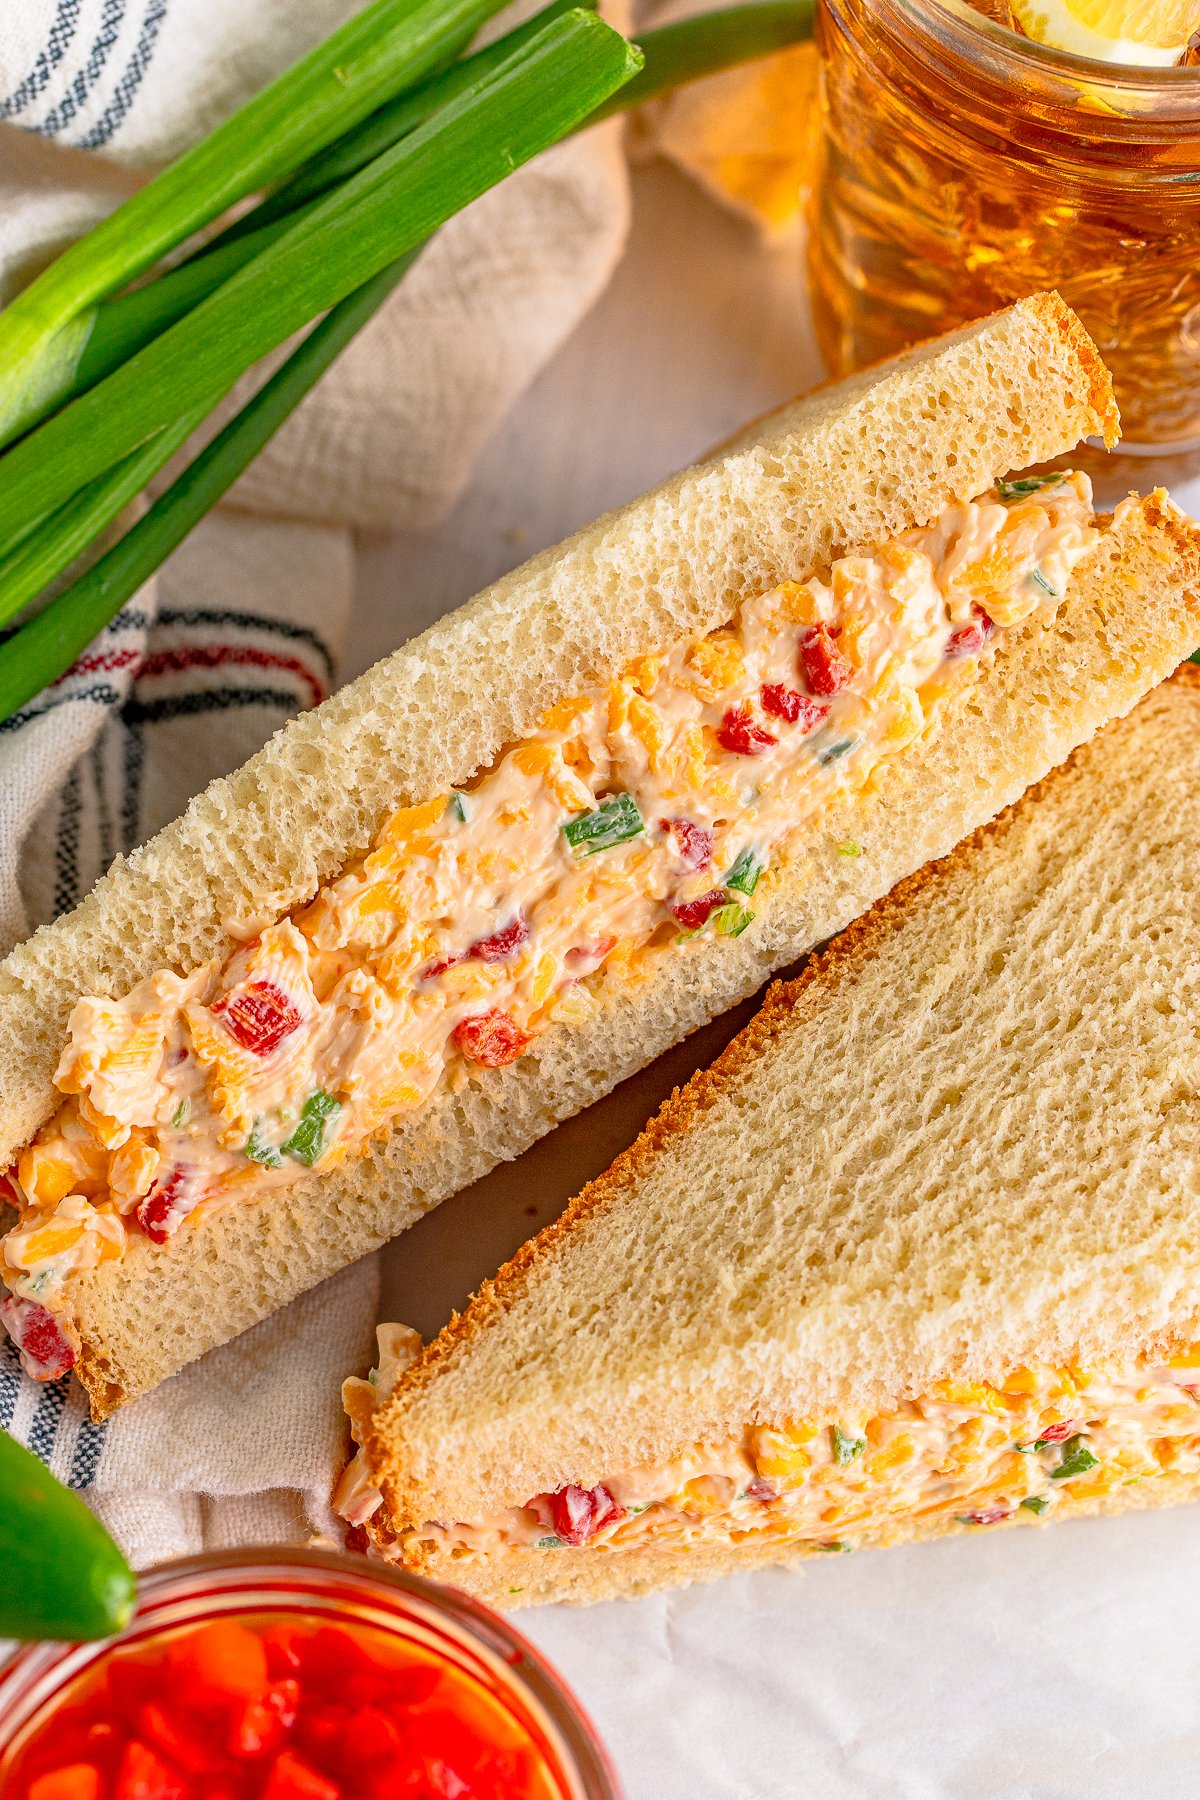 Pimento Cheese Recipe in sandwich with one cut side facing up showing filling.